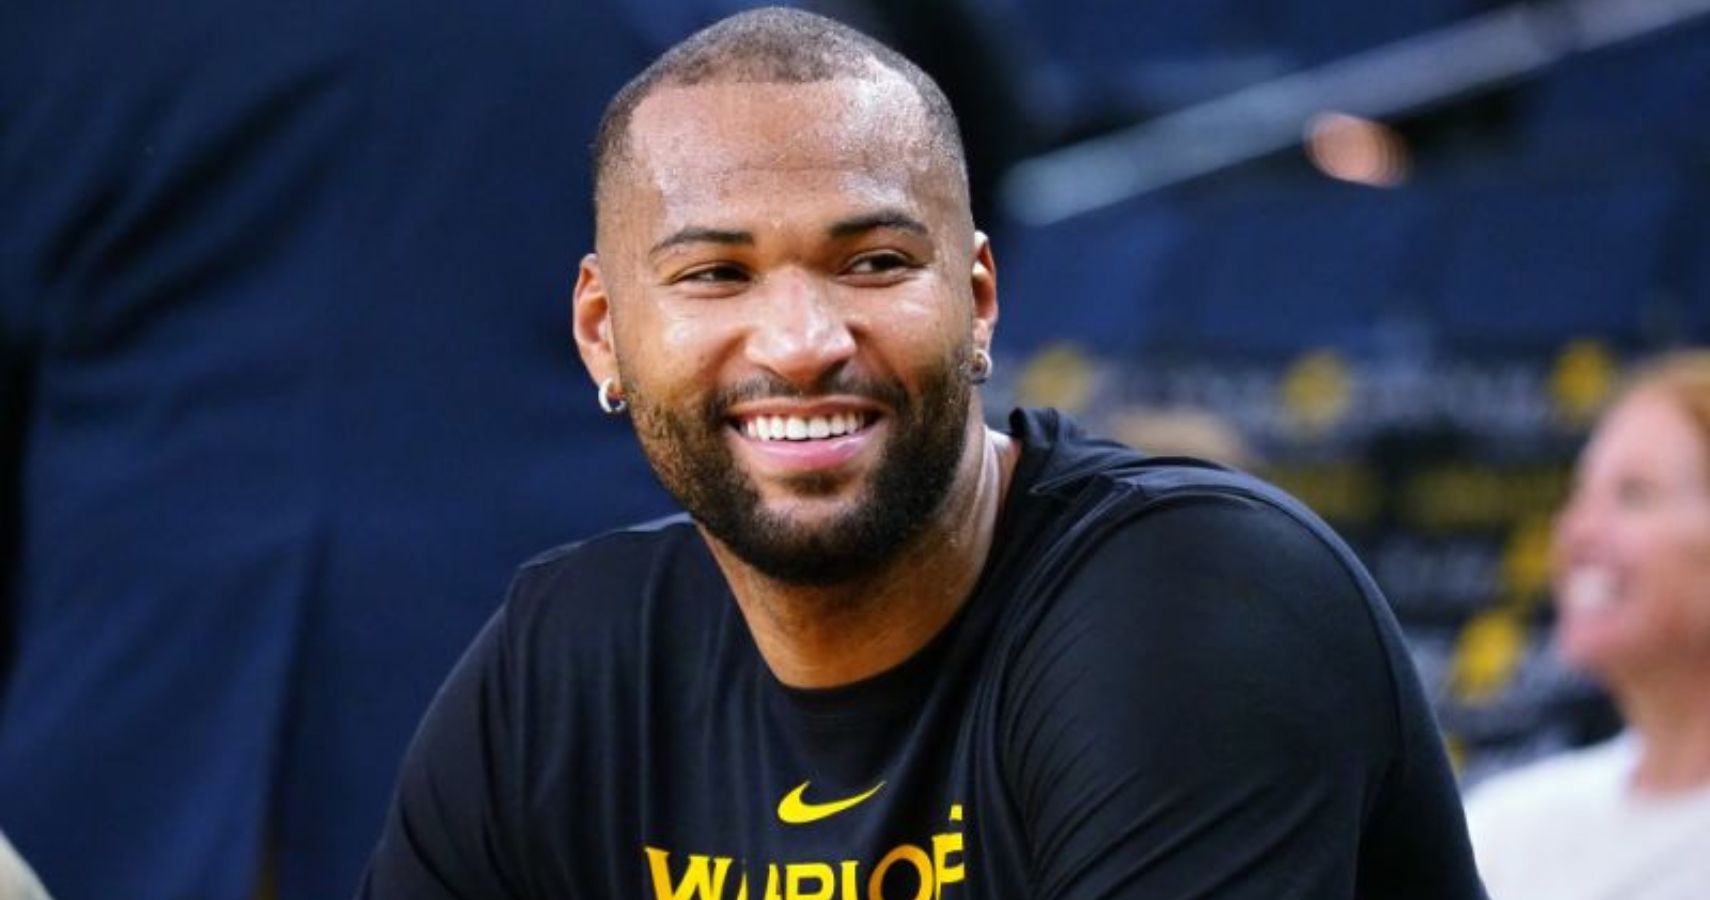 DeMarcus Cousins Says He's Ready To Play For 'The Most Hated Team In